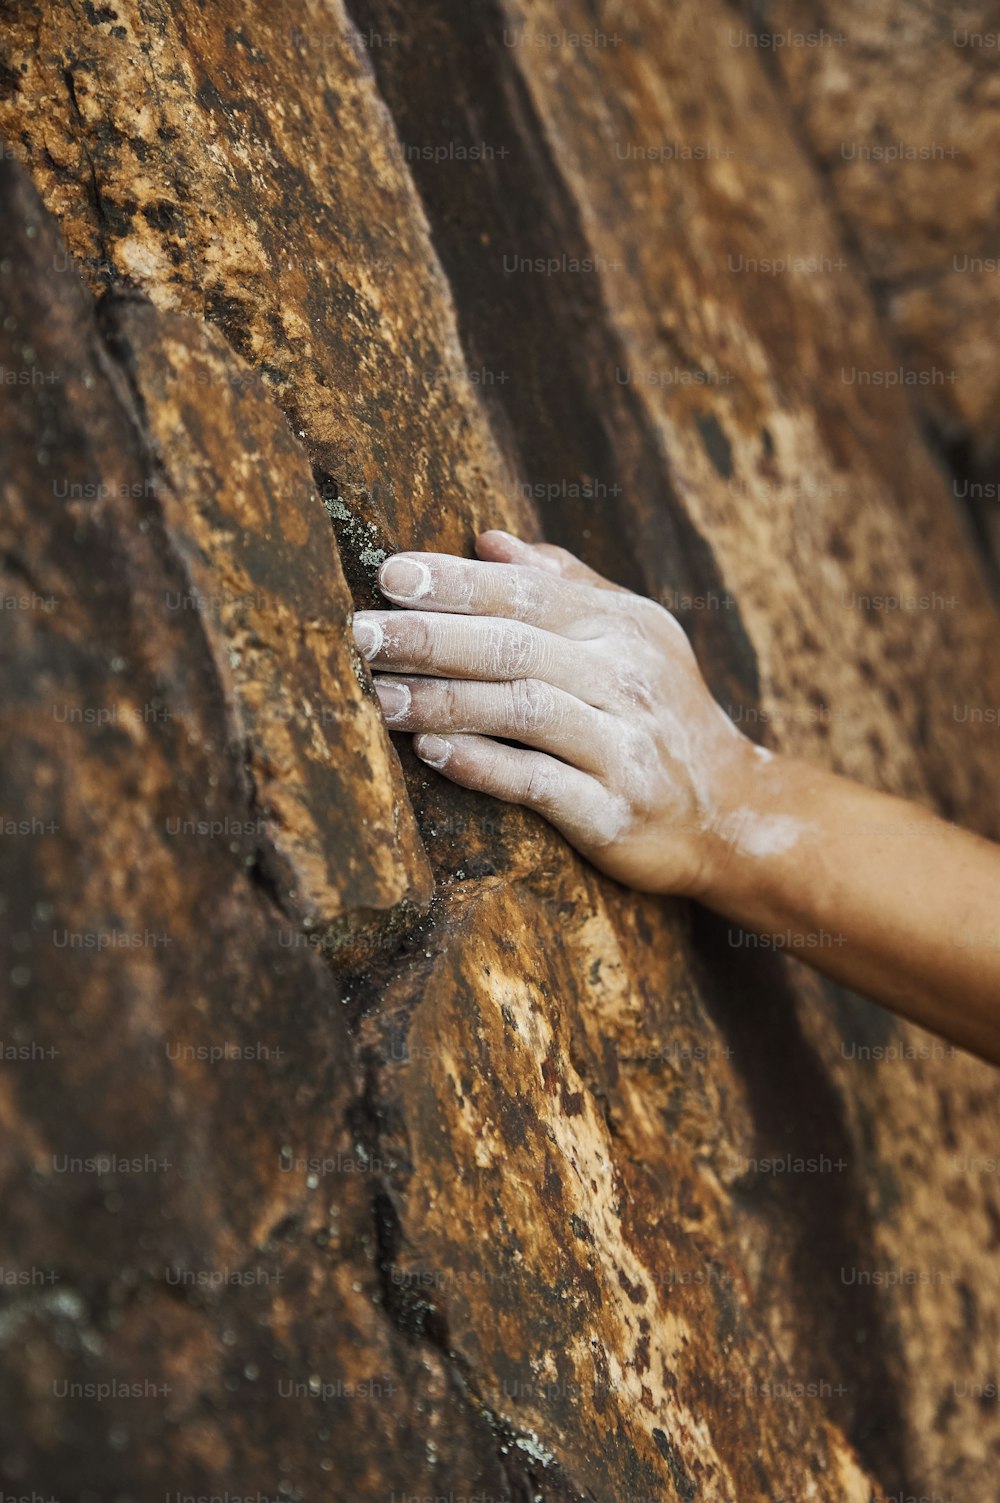 a person climbing up the side of a large rock